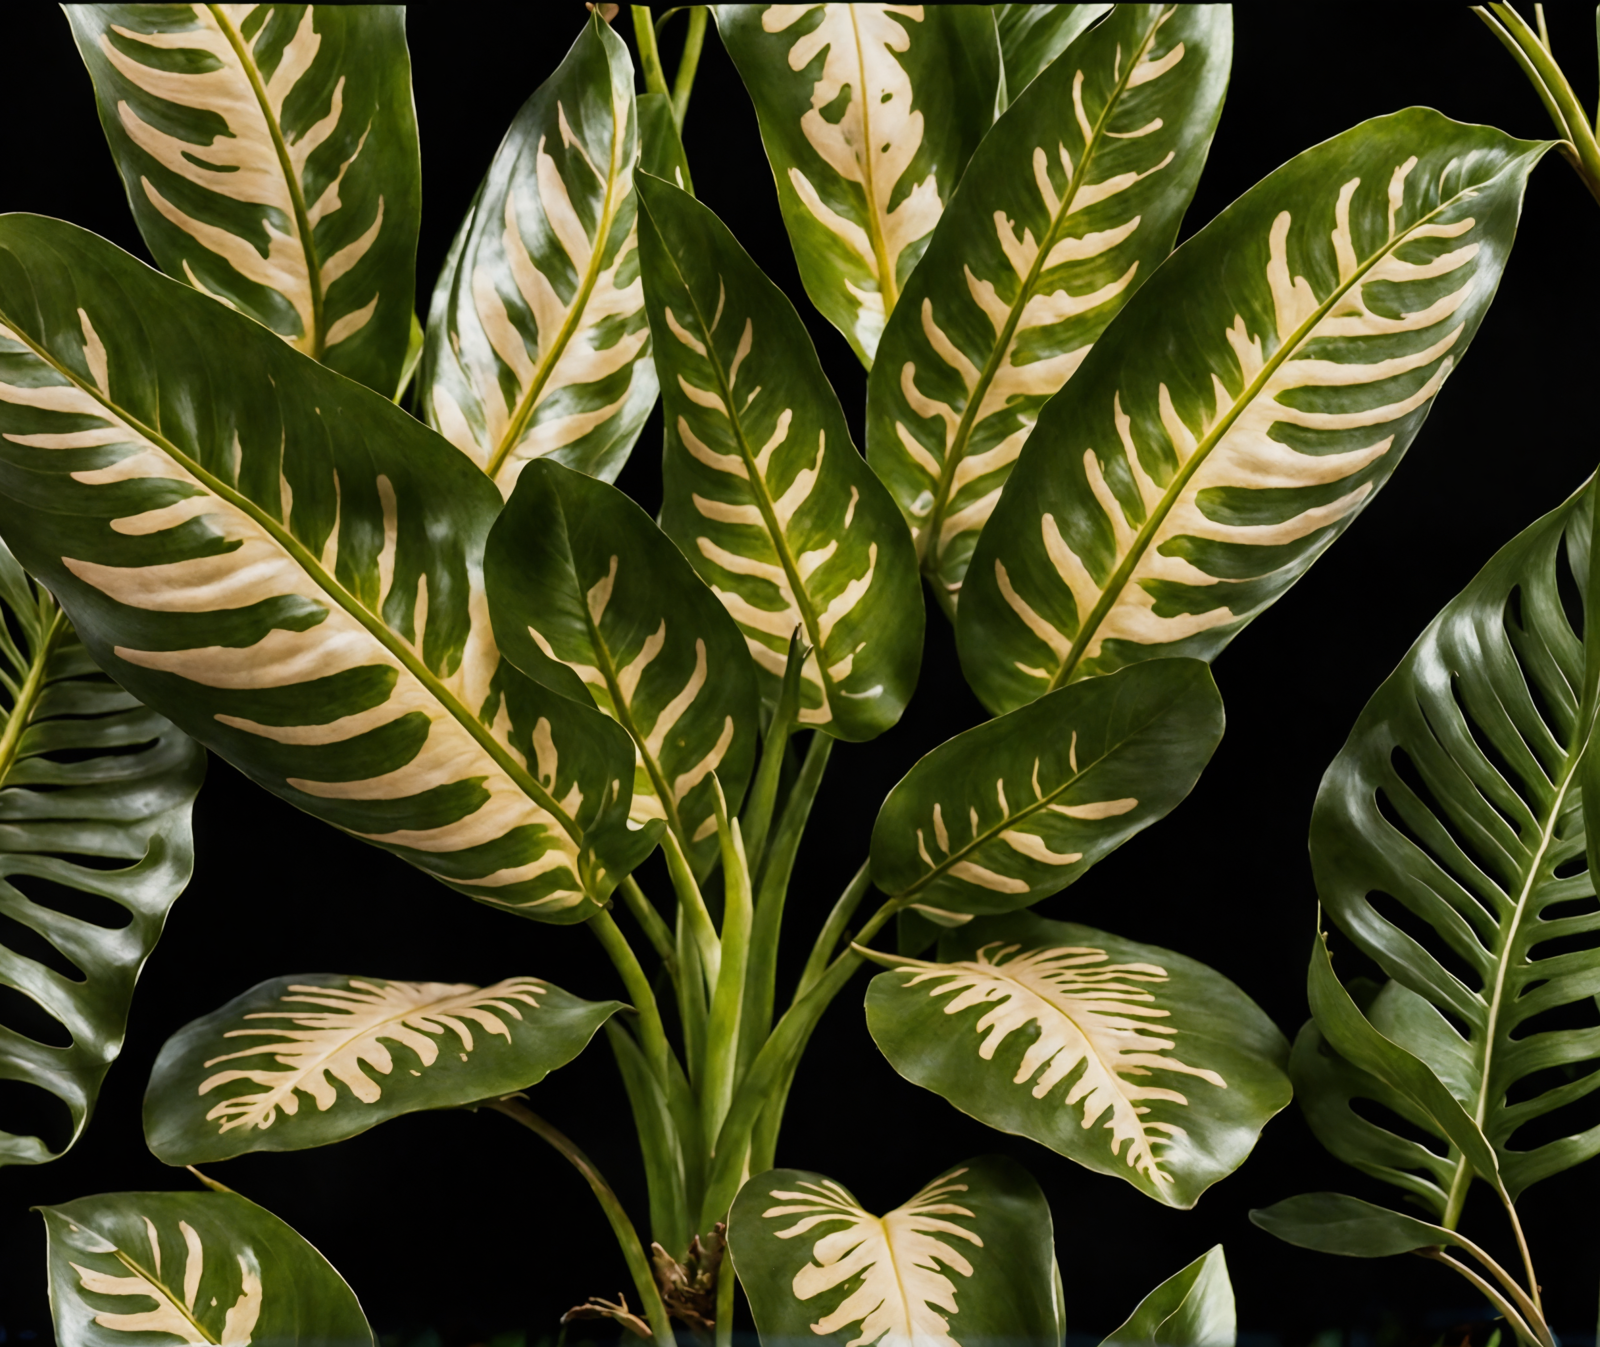 Dieffenbachia seguine in a planter, with detailed leaves, against a dark background in a well-lit room.